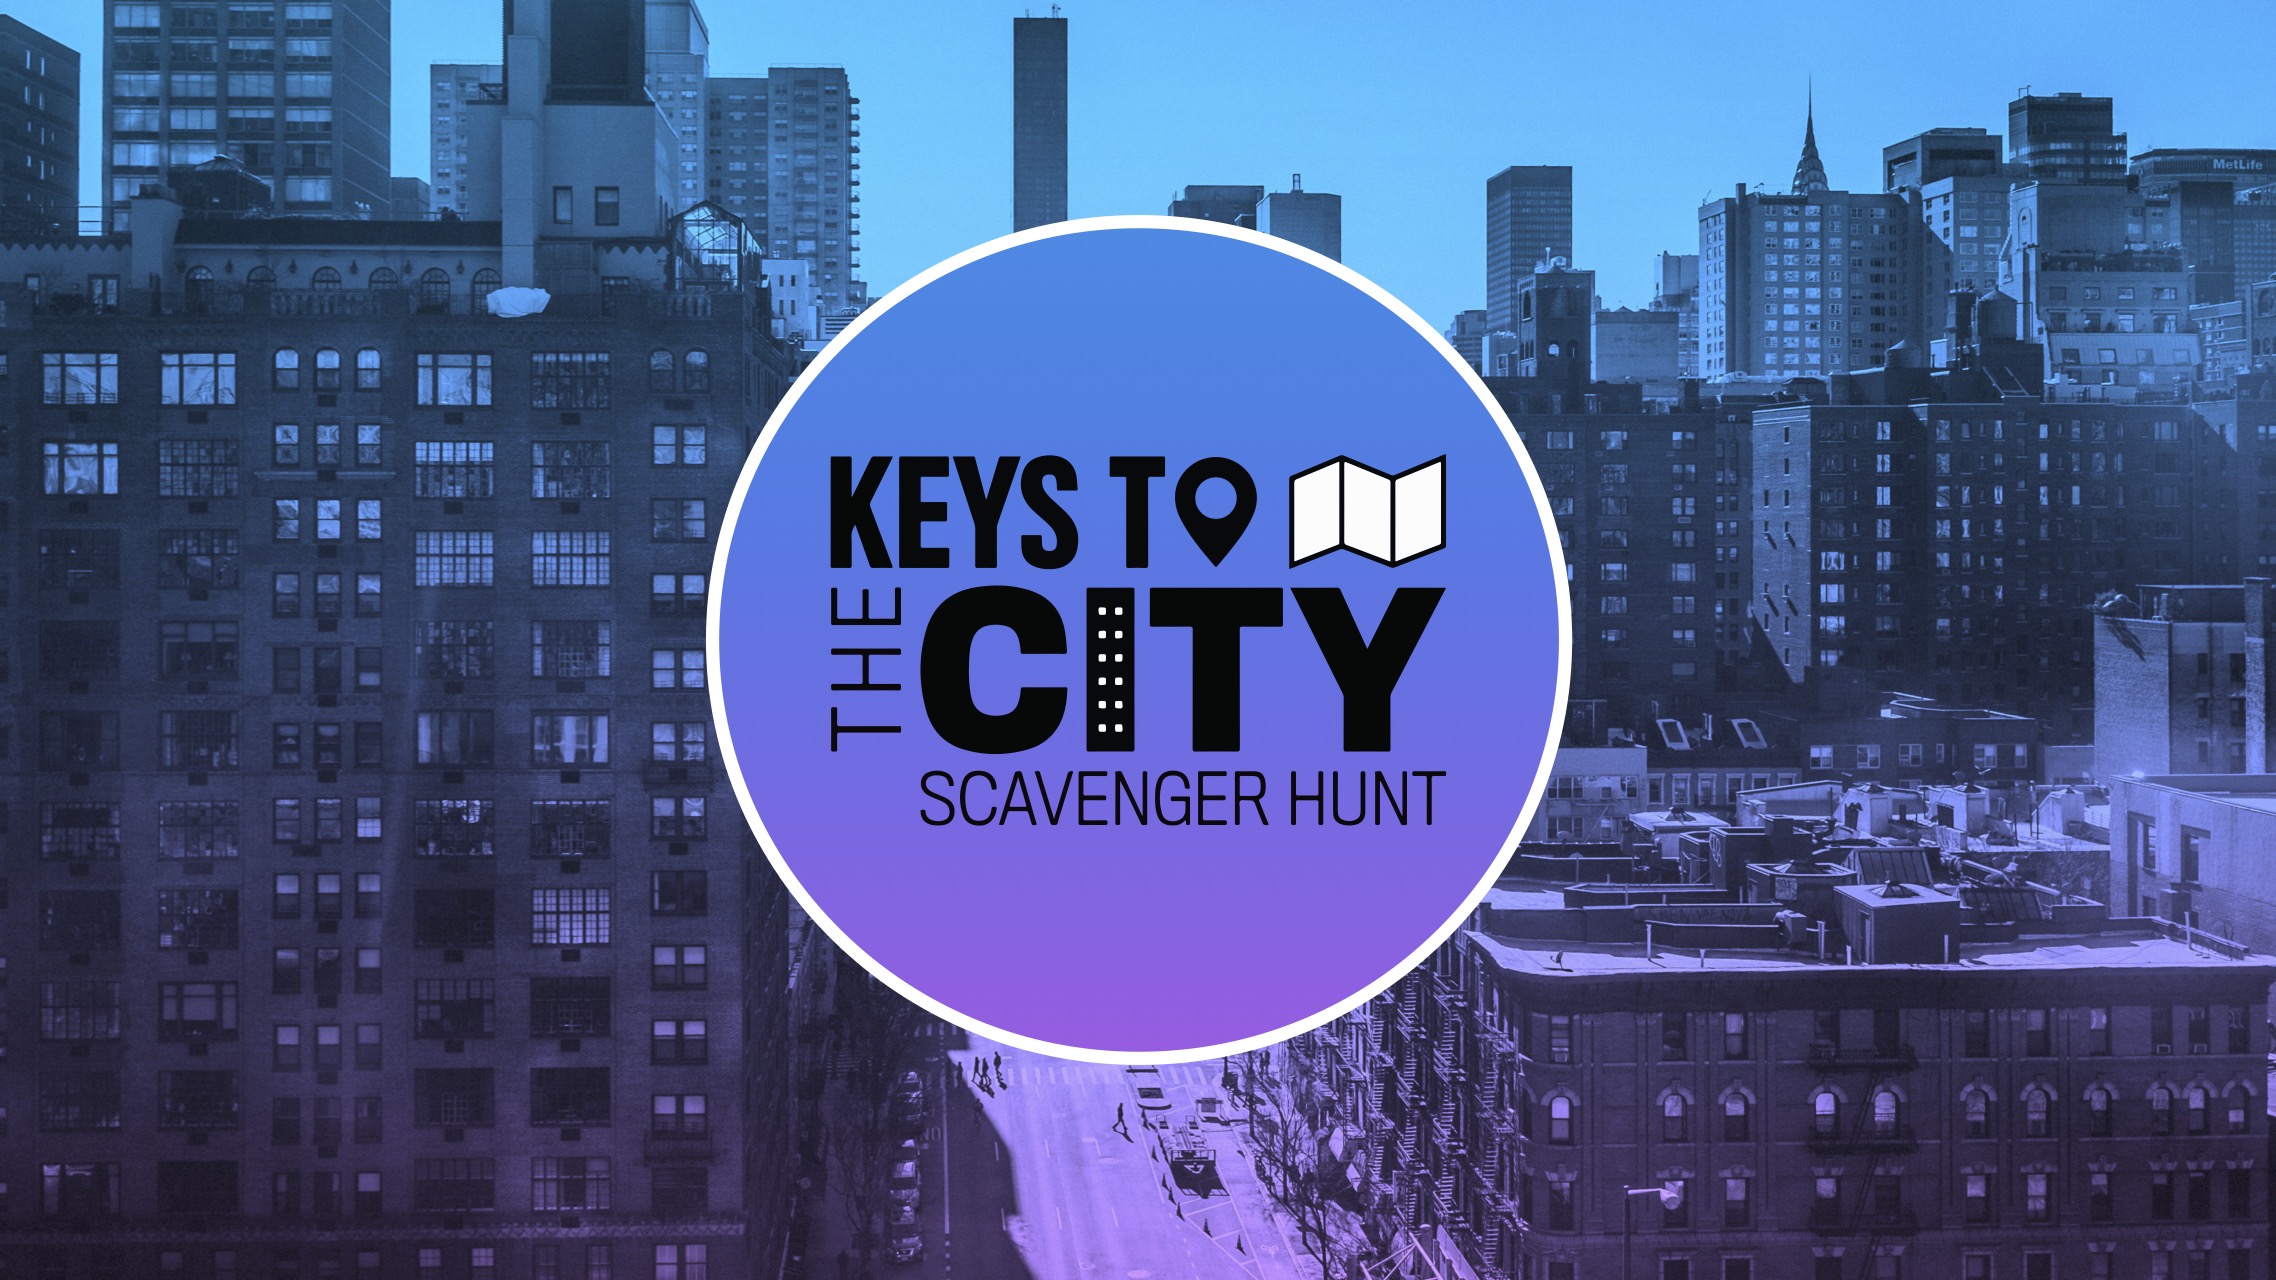 Graphic background of buildings in New York City with text reads "Key to the City"